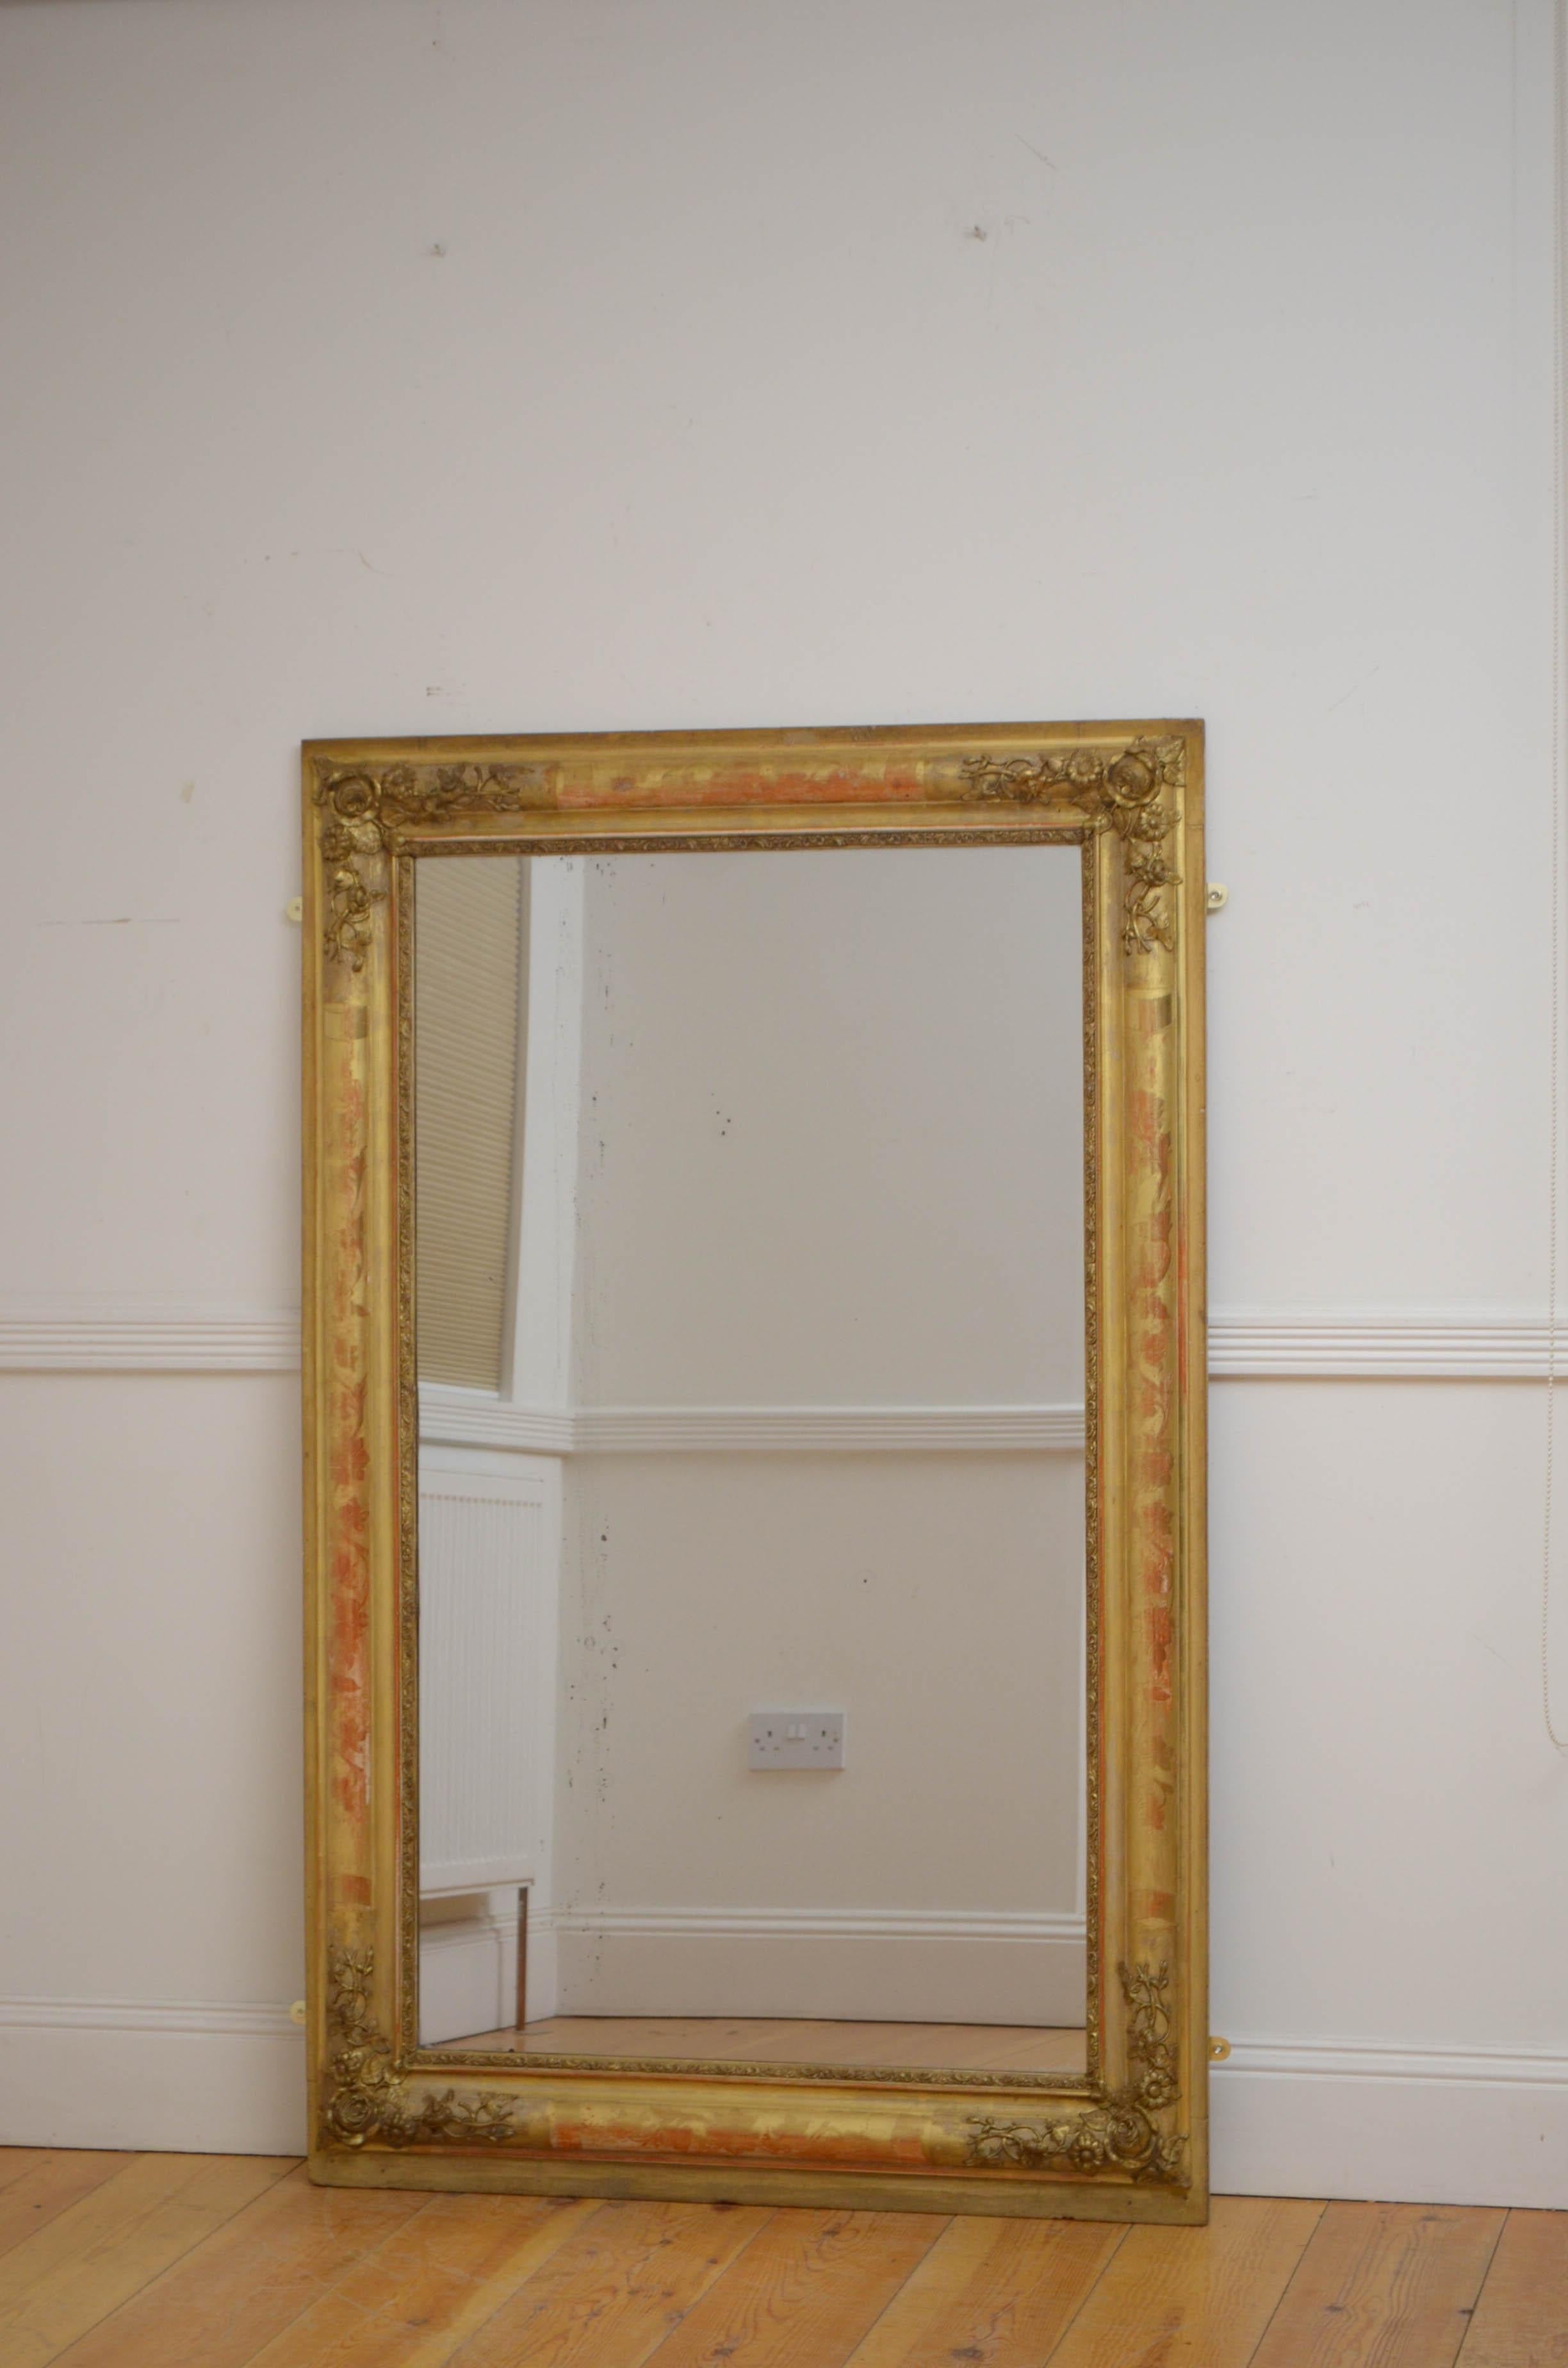 Sn5144 A large French gilded wall mirror with original glass with some imperfections in moulded and carved gilded frame with flower decoration to corners. This antique mirror retains its original glass, original gilt and original backboards ,all in